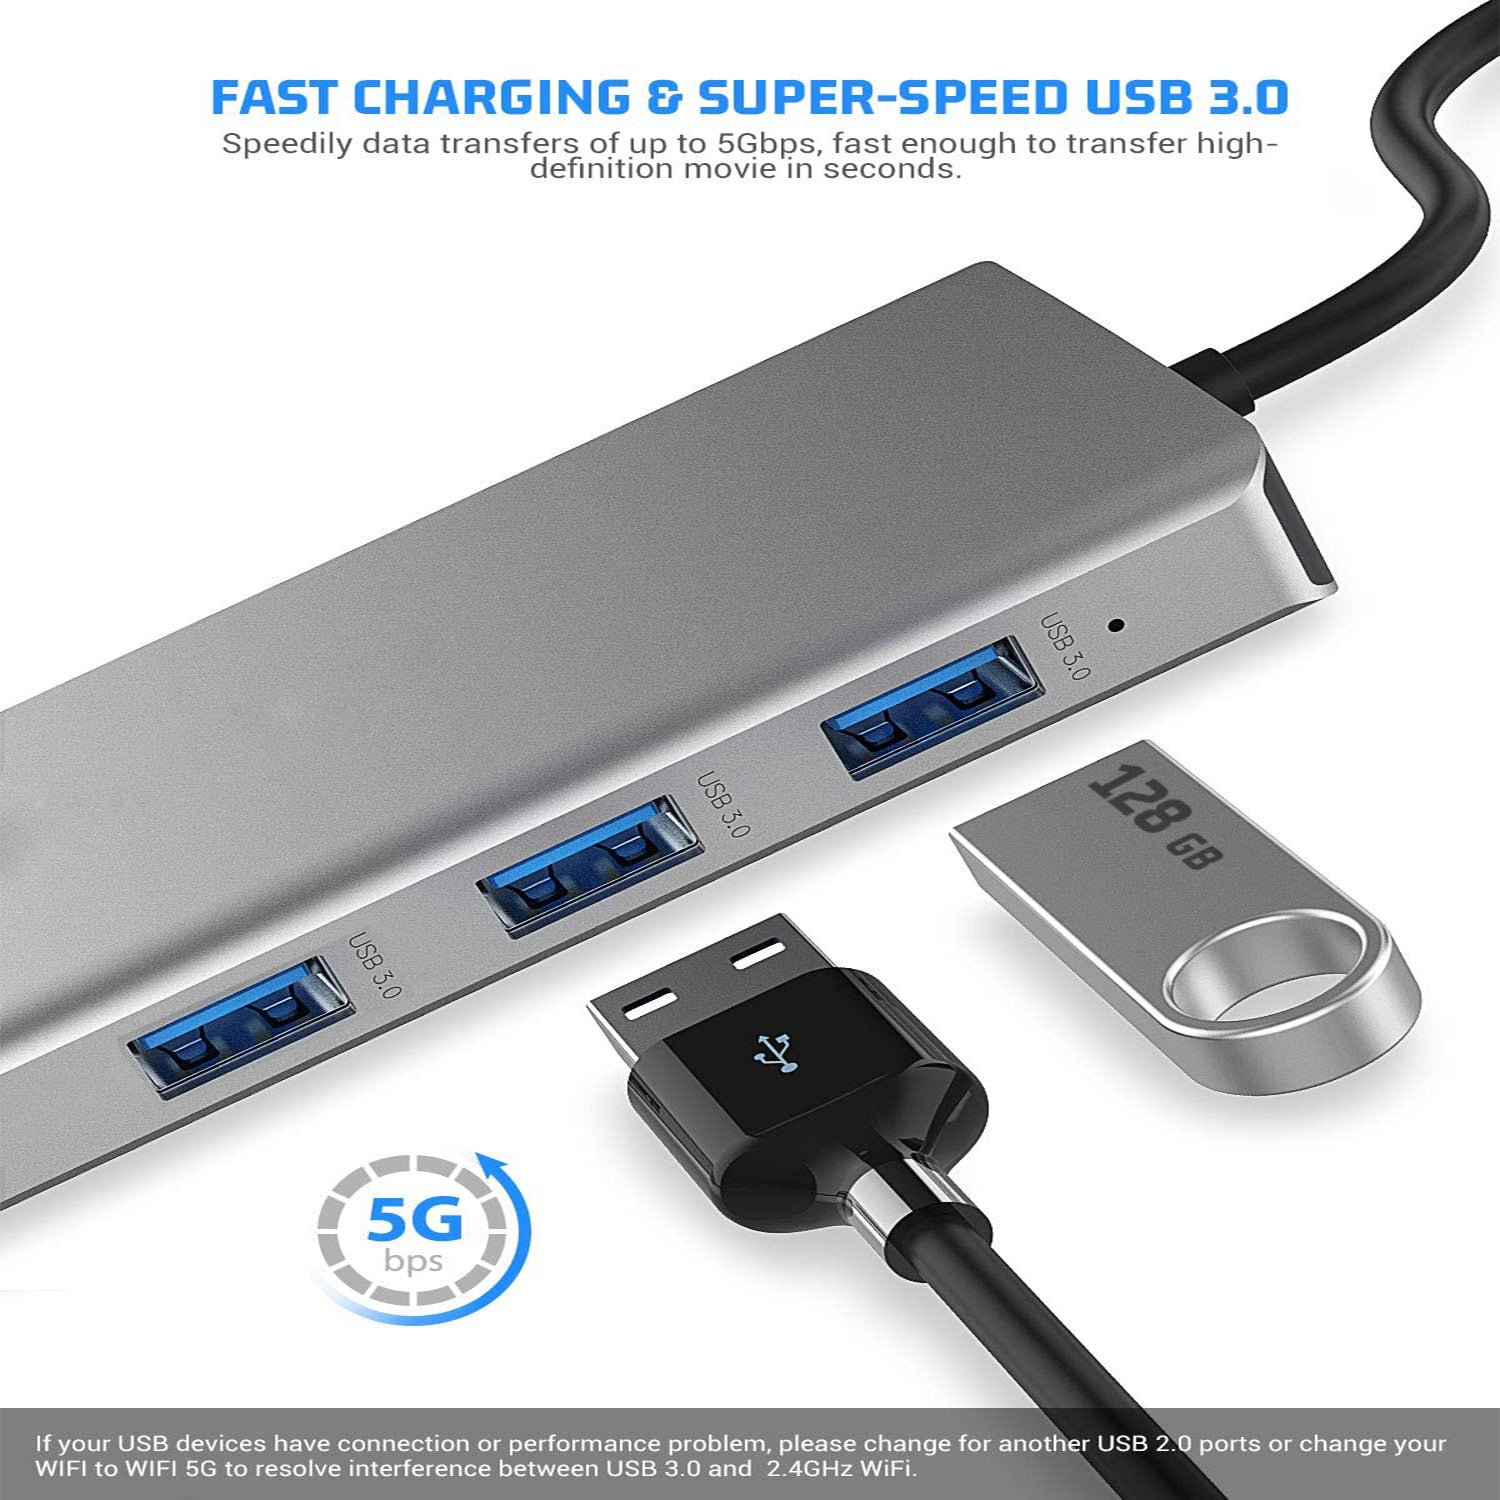 Bakeey 12 In 1 Triple Display USB-C Hub Docking Station Adapter With 2 * USB 3.0 / 2 * USB 2.0 Port / 100W Type-C PD3.0 Power Delivery / Dual HDMI 4K HD Display / VGA / Gigabit RJ45 Network / 3.5mm Audio Jack / Memory Card Readers